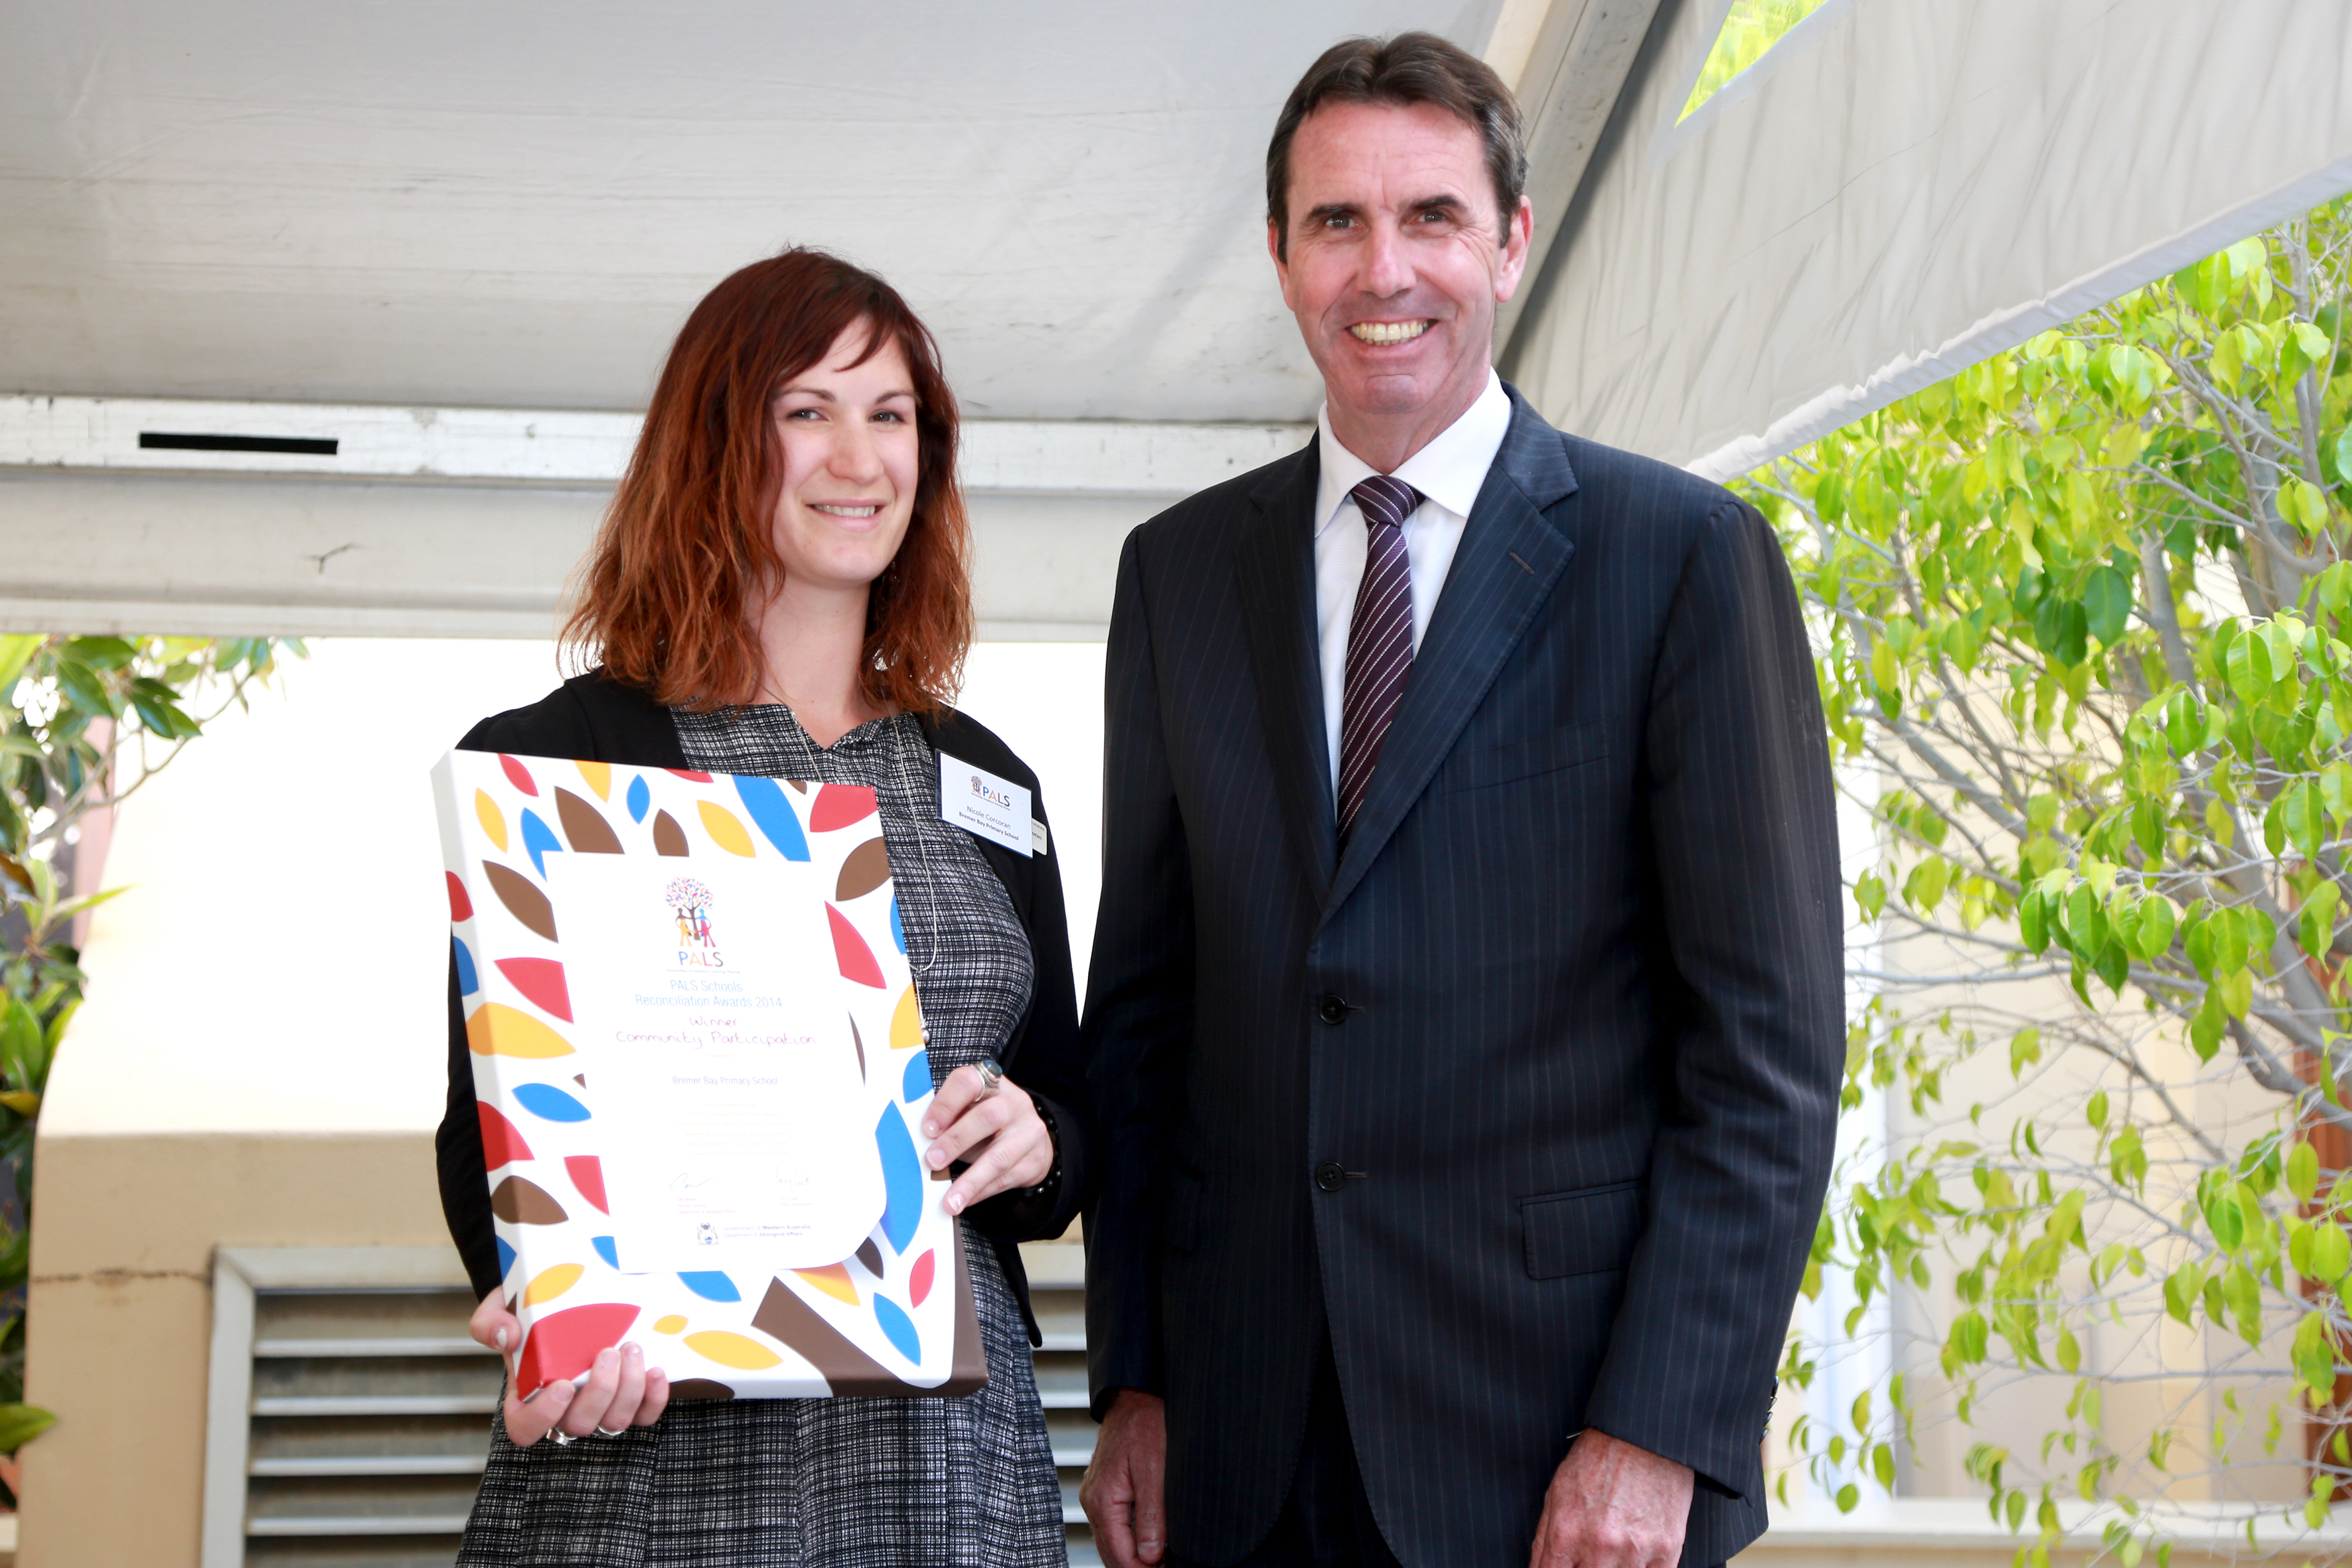 Substantive Principal, Nicole Corcoran, receiving a State PALS Award for Community Participation from former Education and Training Minister, Peter Collier